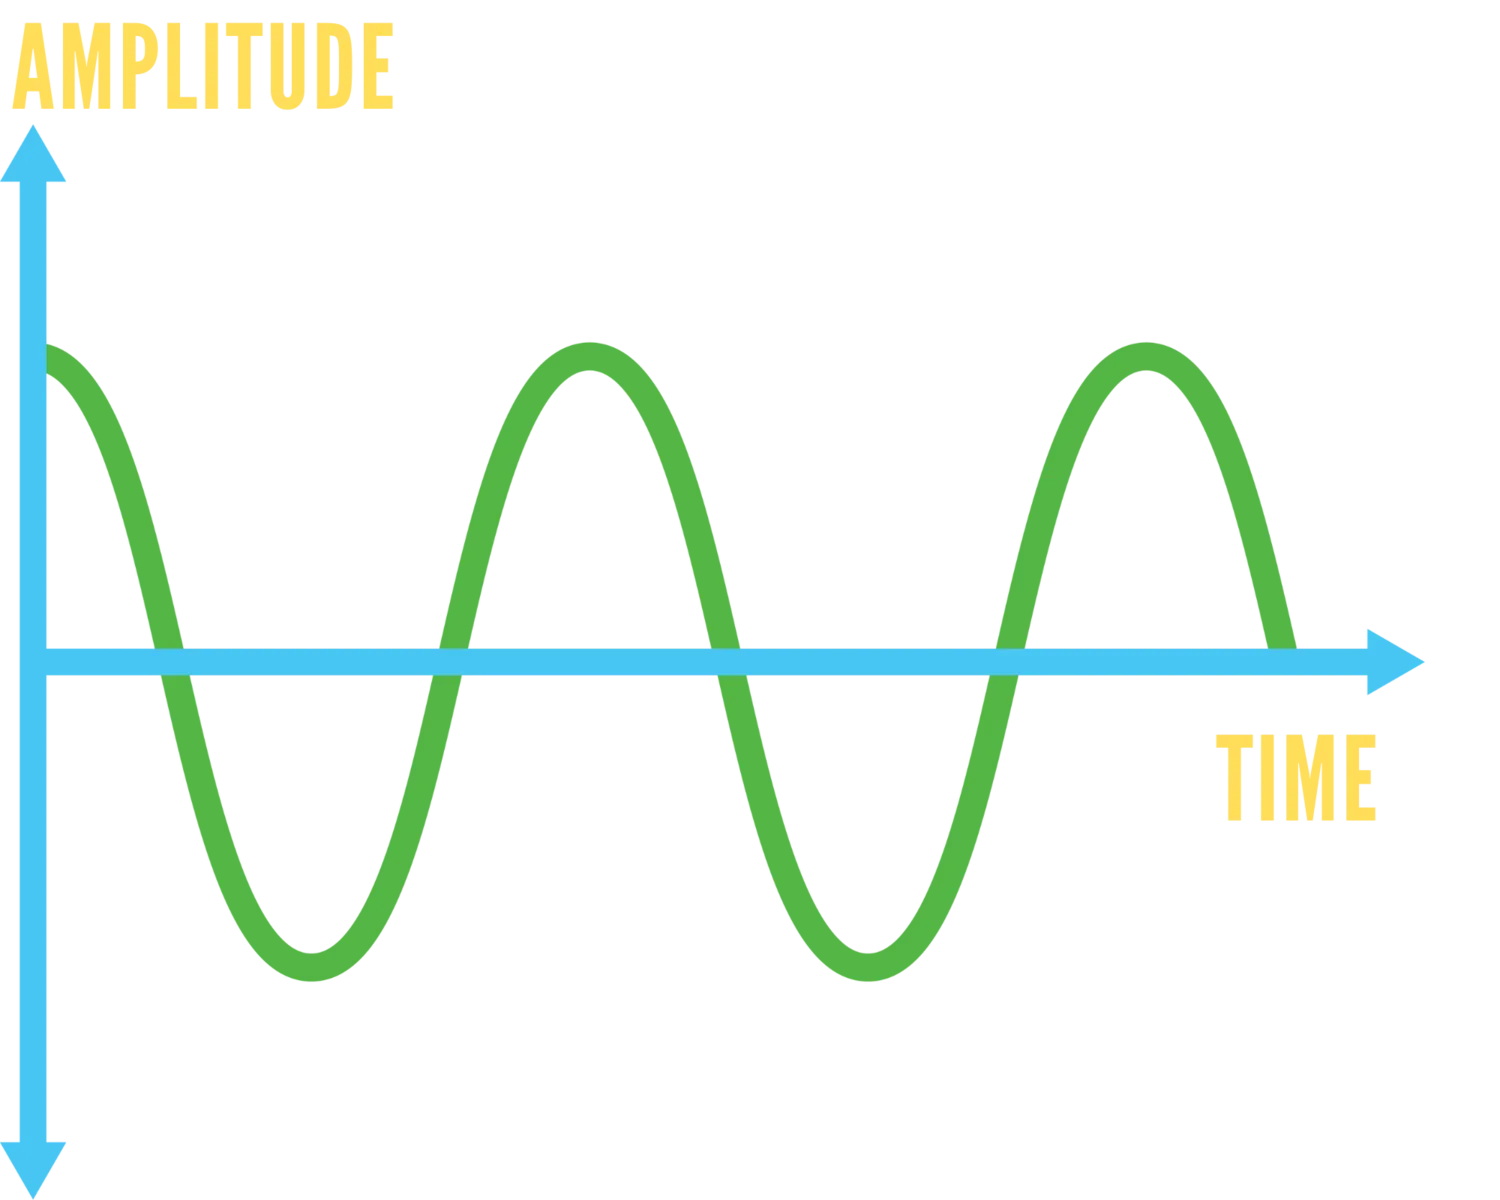 An image of a sound waves amplitude over time.